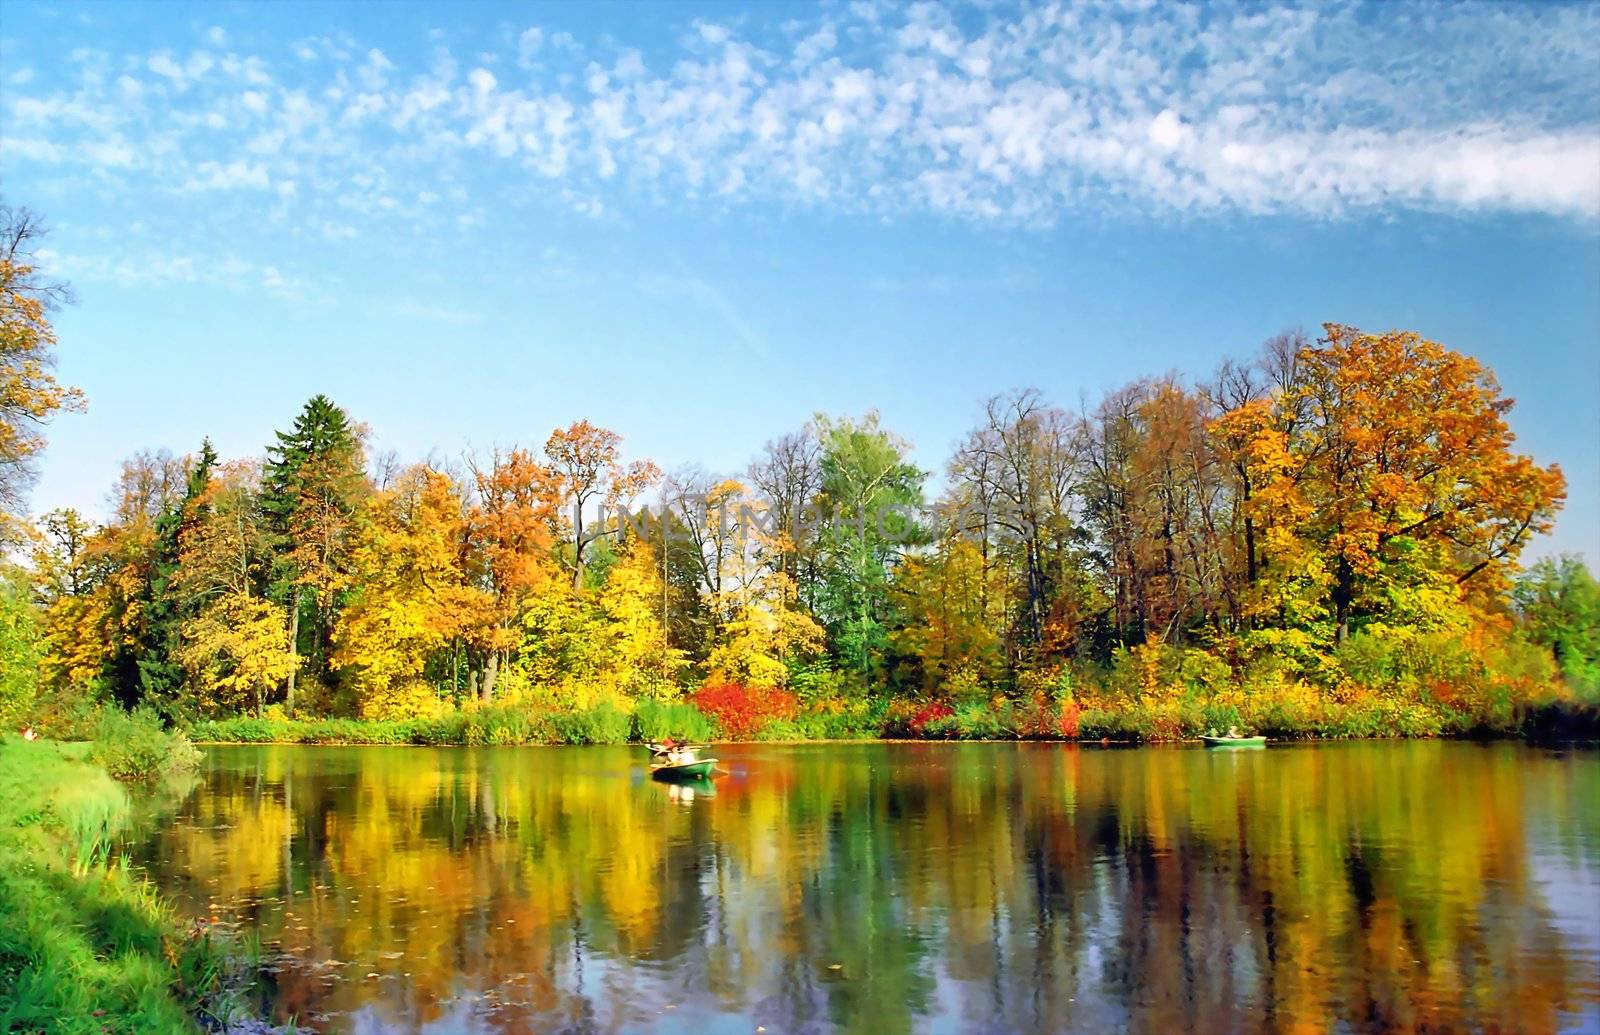 Lake with picturesque autumn trees by mulden